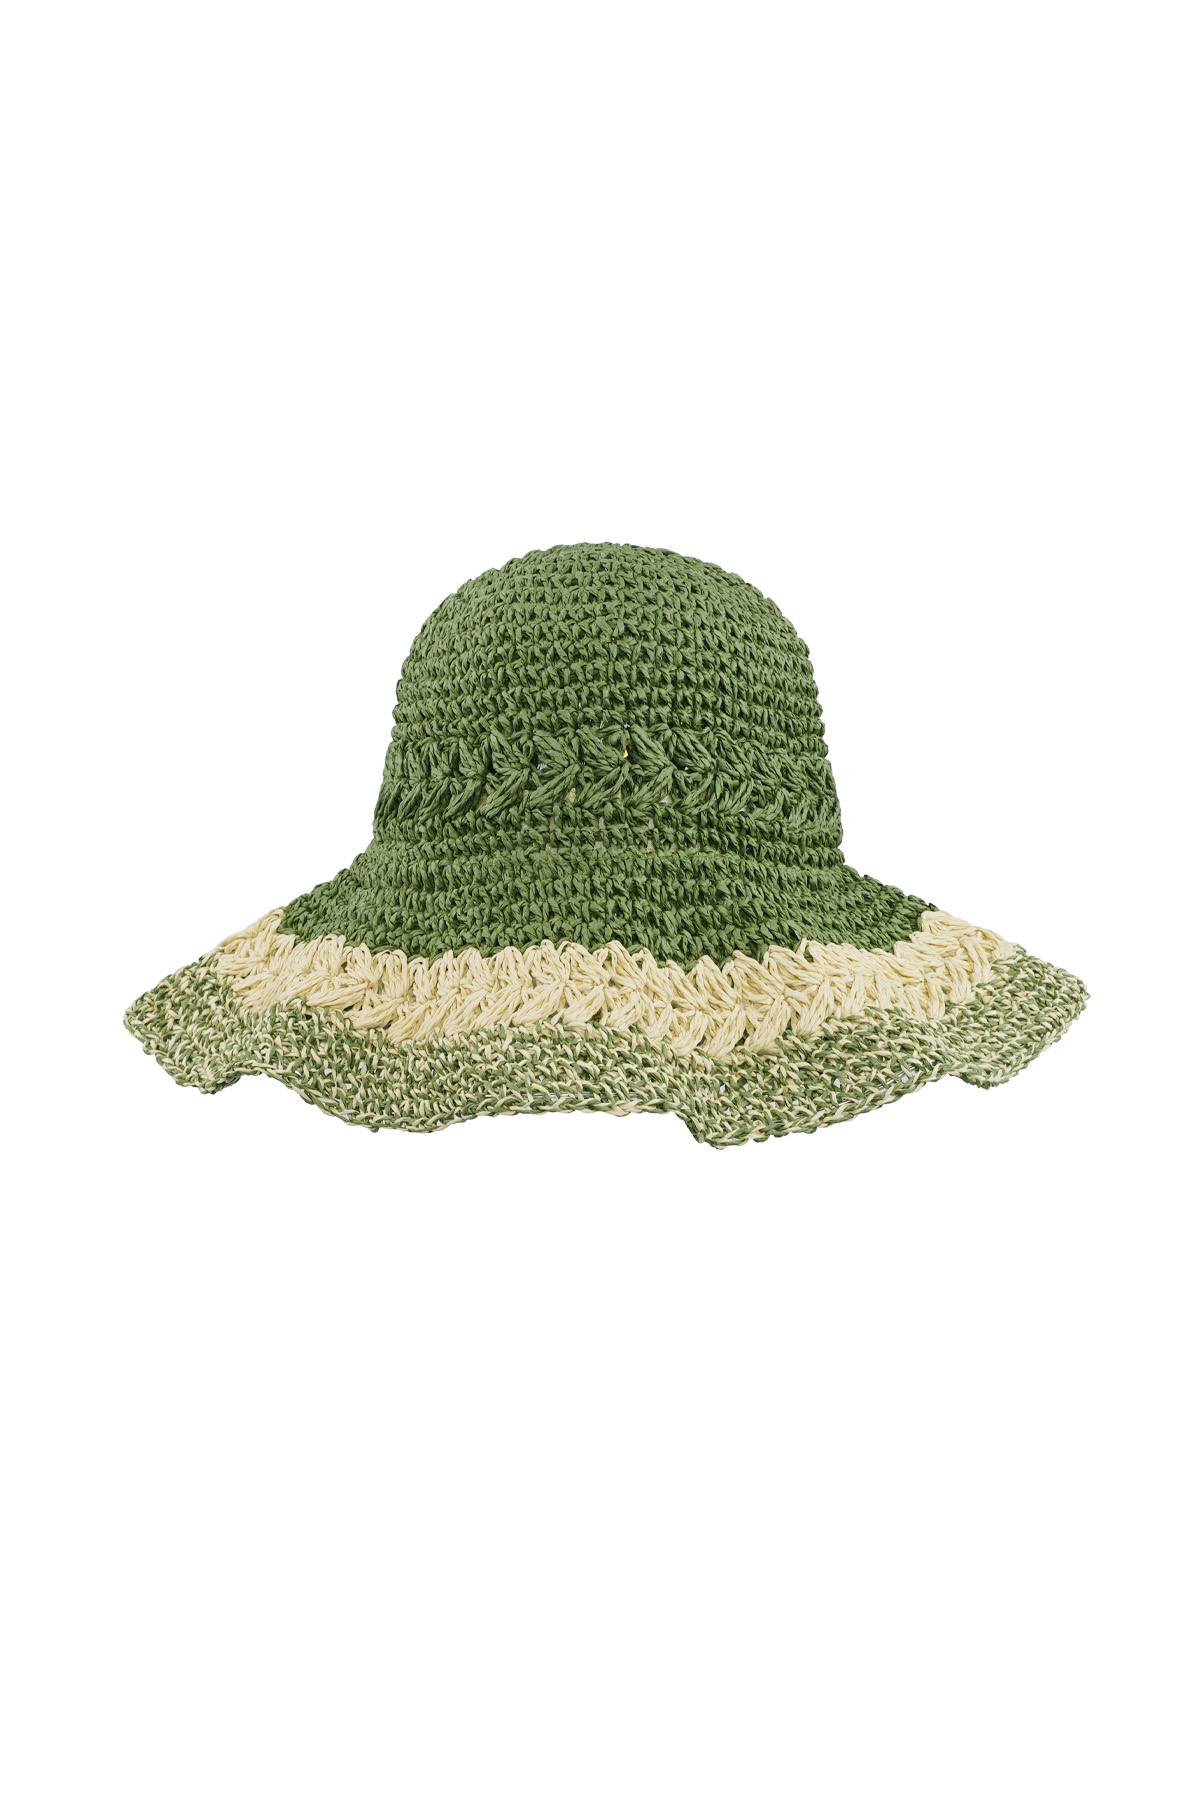 Braided hat with layers - green  h5 